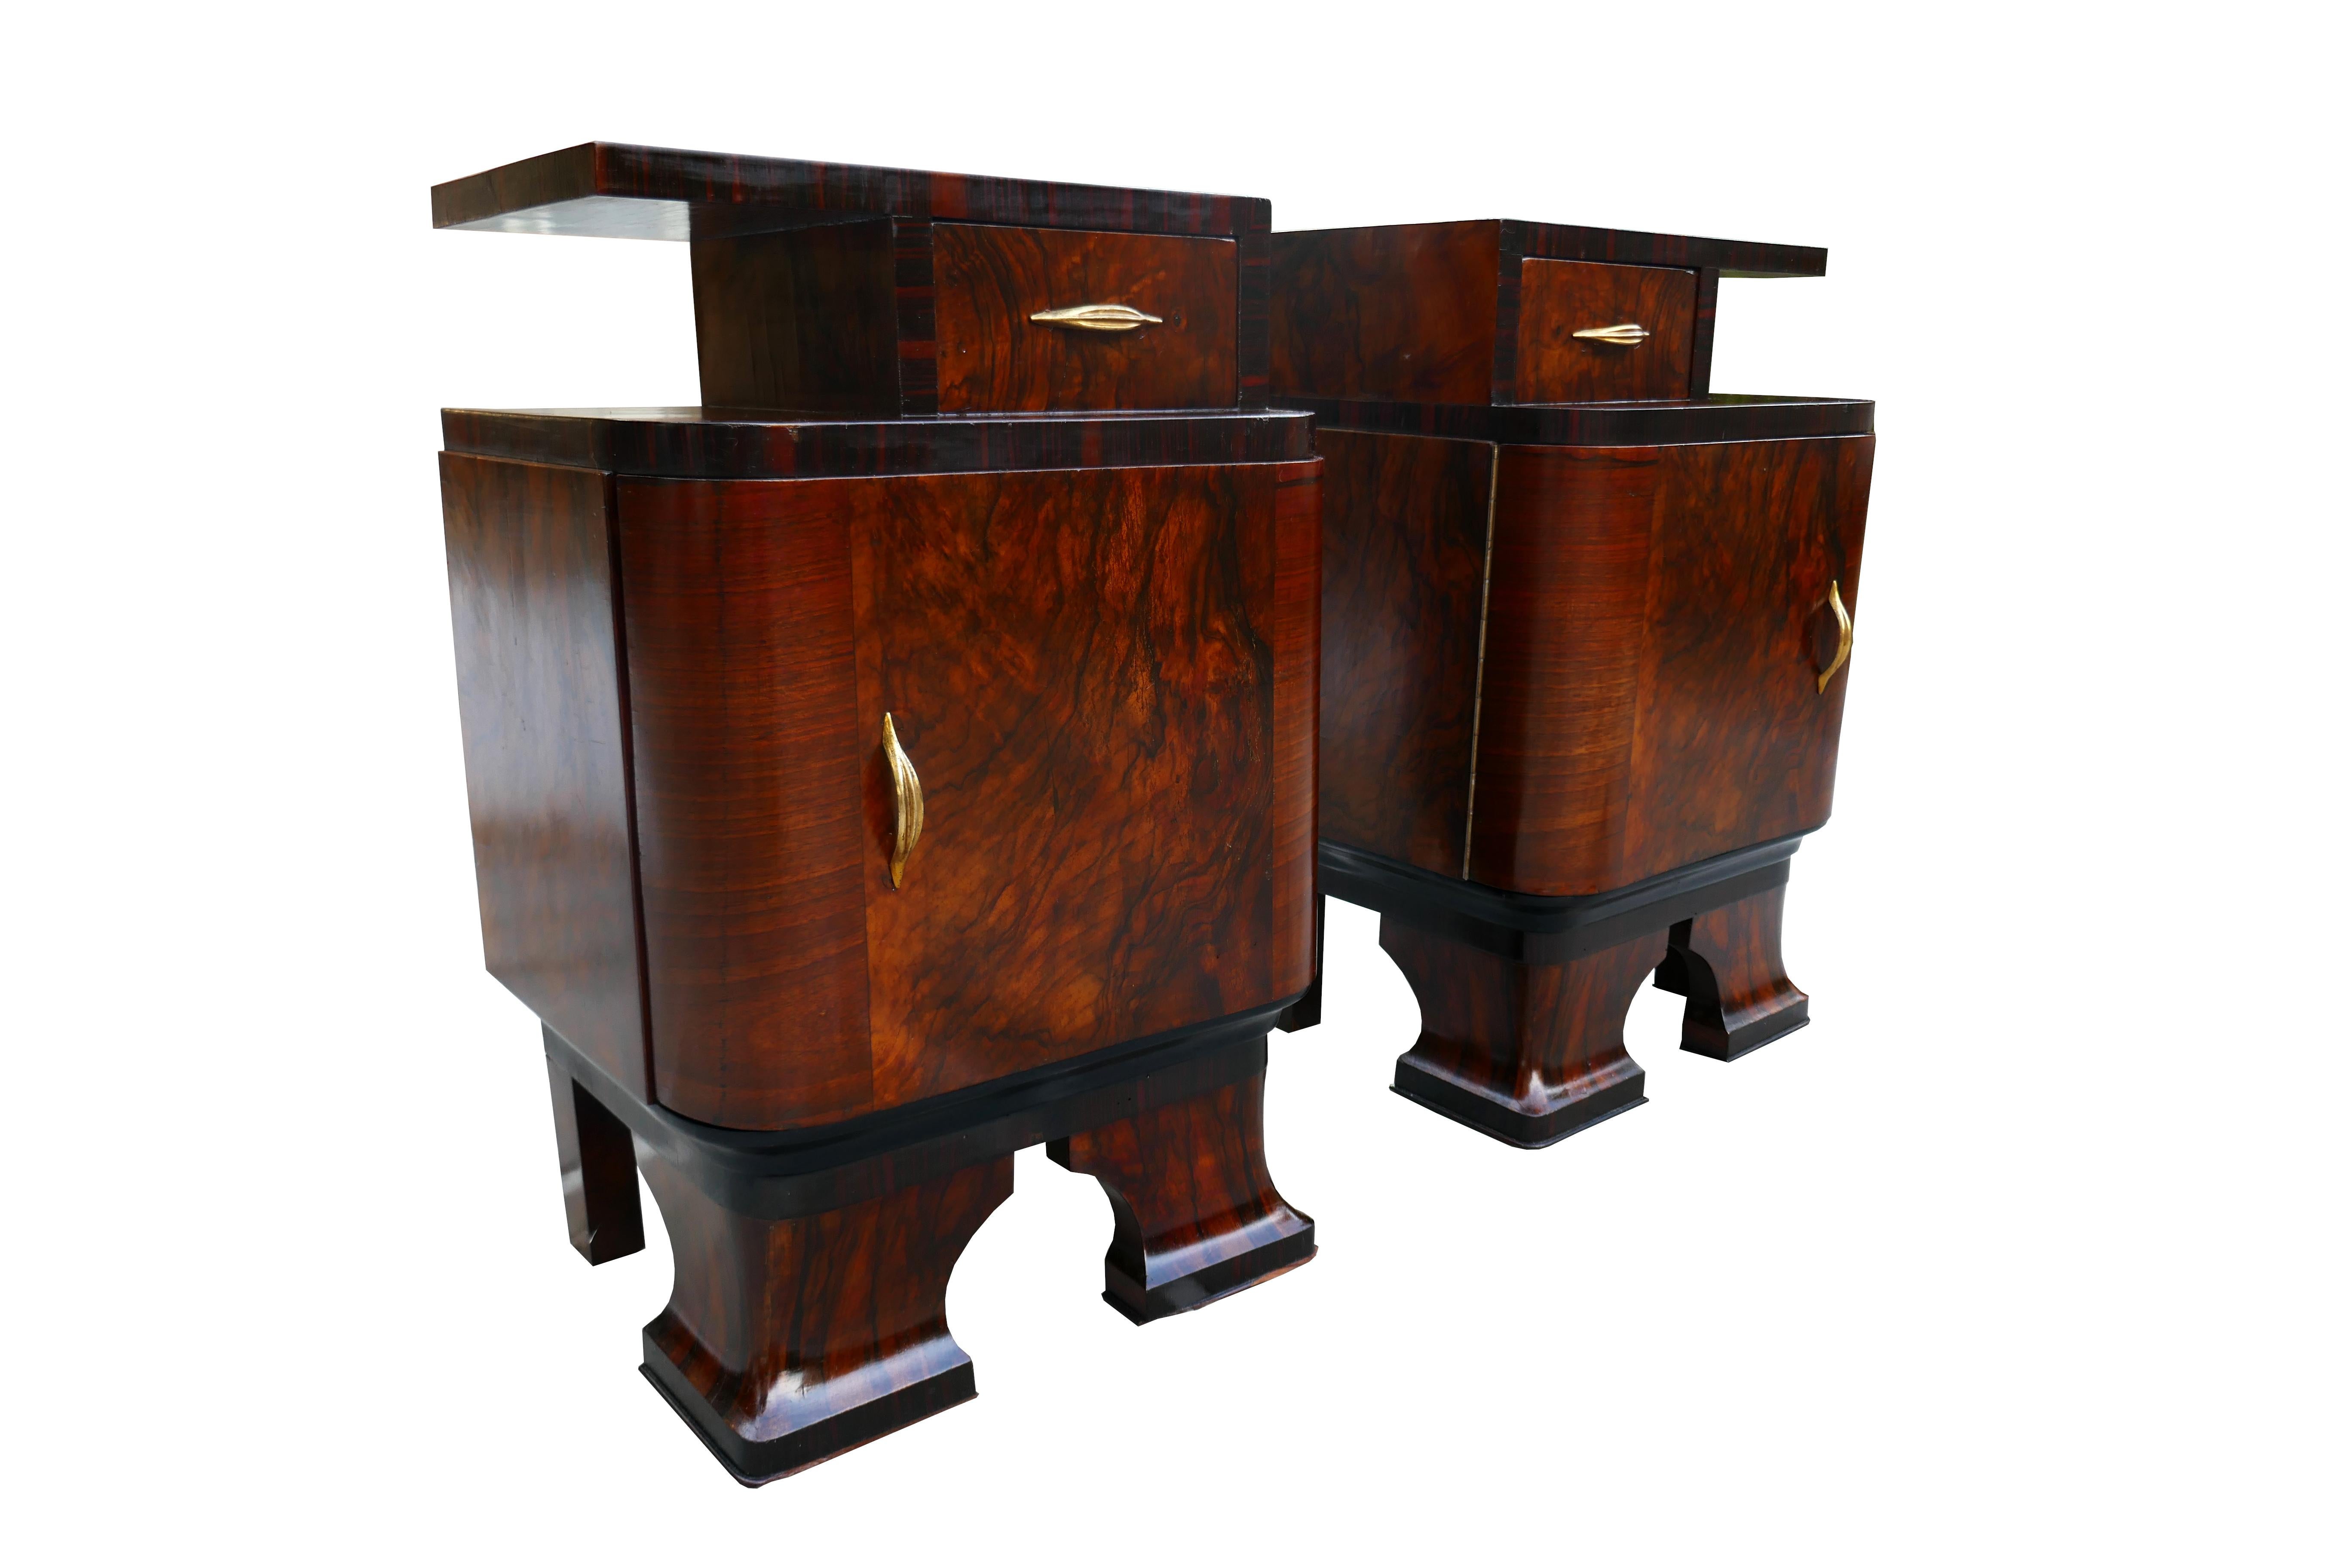 Pair of bedside tables.
Attributed to Gaetano Borsani.
Three coats of Antitarlo and holes left open.
Shellac painting in an unprofessional manner.
Signs of use and impact and misses
The doors of the two nightstands do not close perfectly,
One